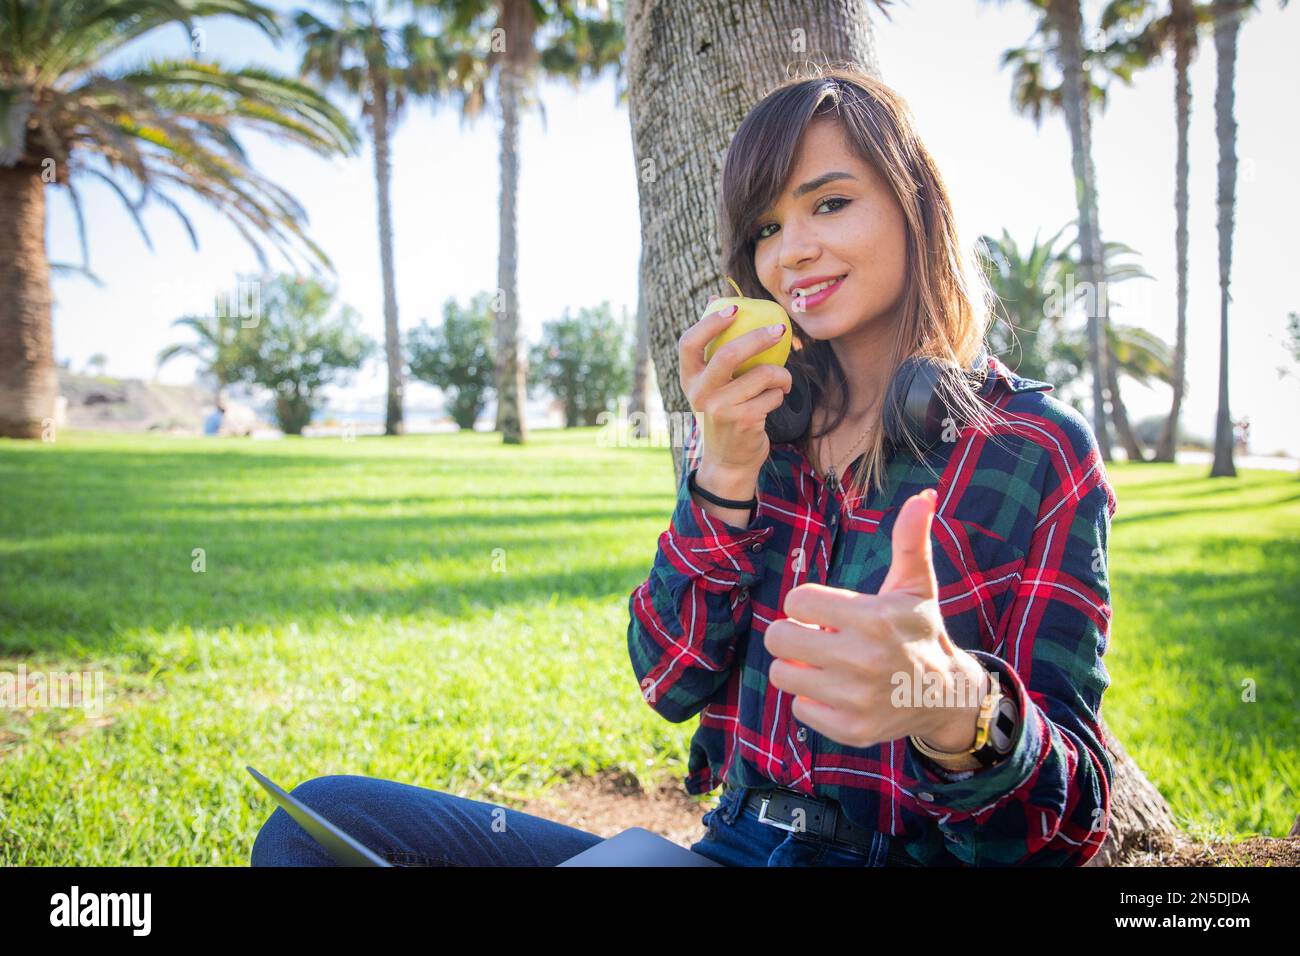 Young vegan woman eats an apple and gives thumbs up, photo with copy space. Stock Photo